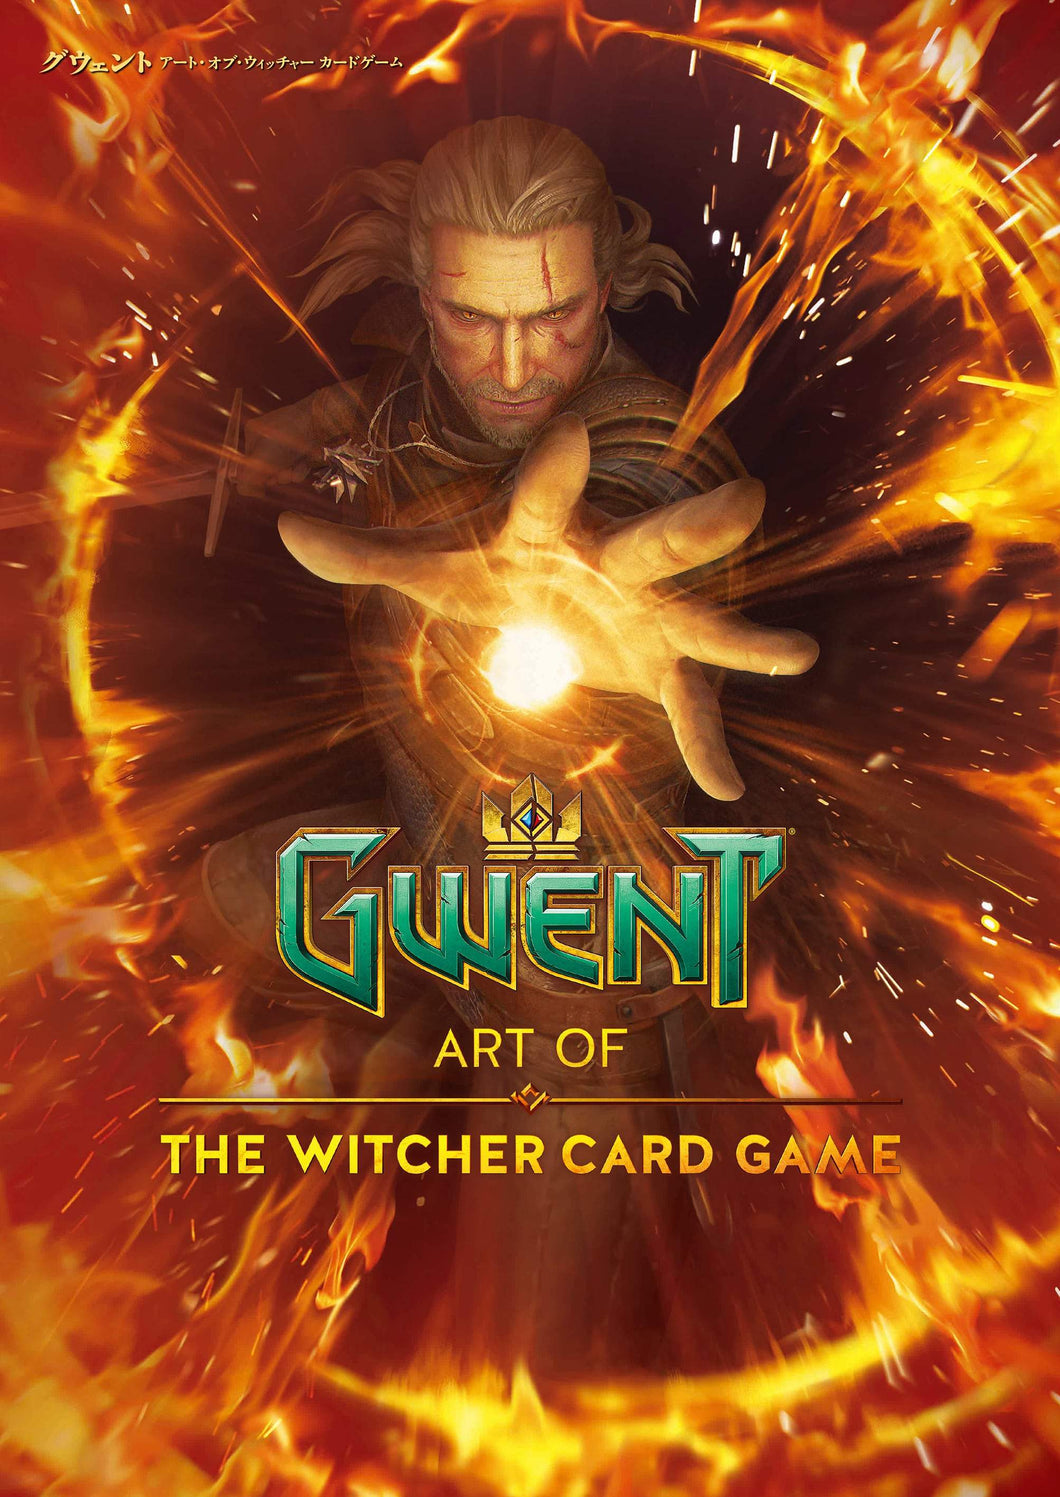 GWENT art of the witcher card game